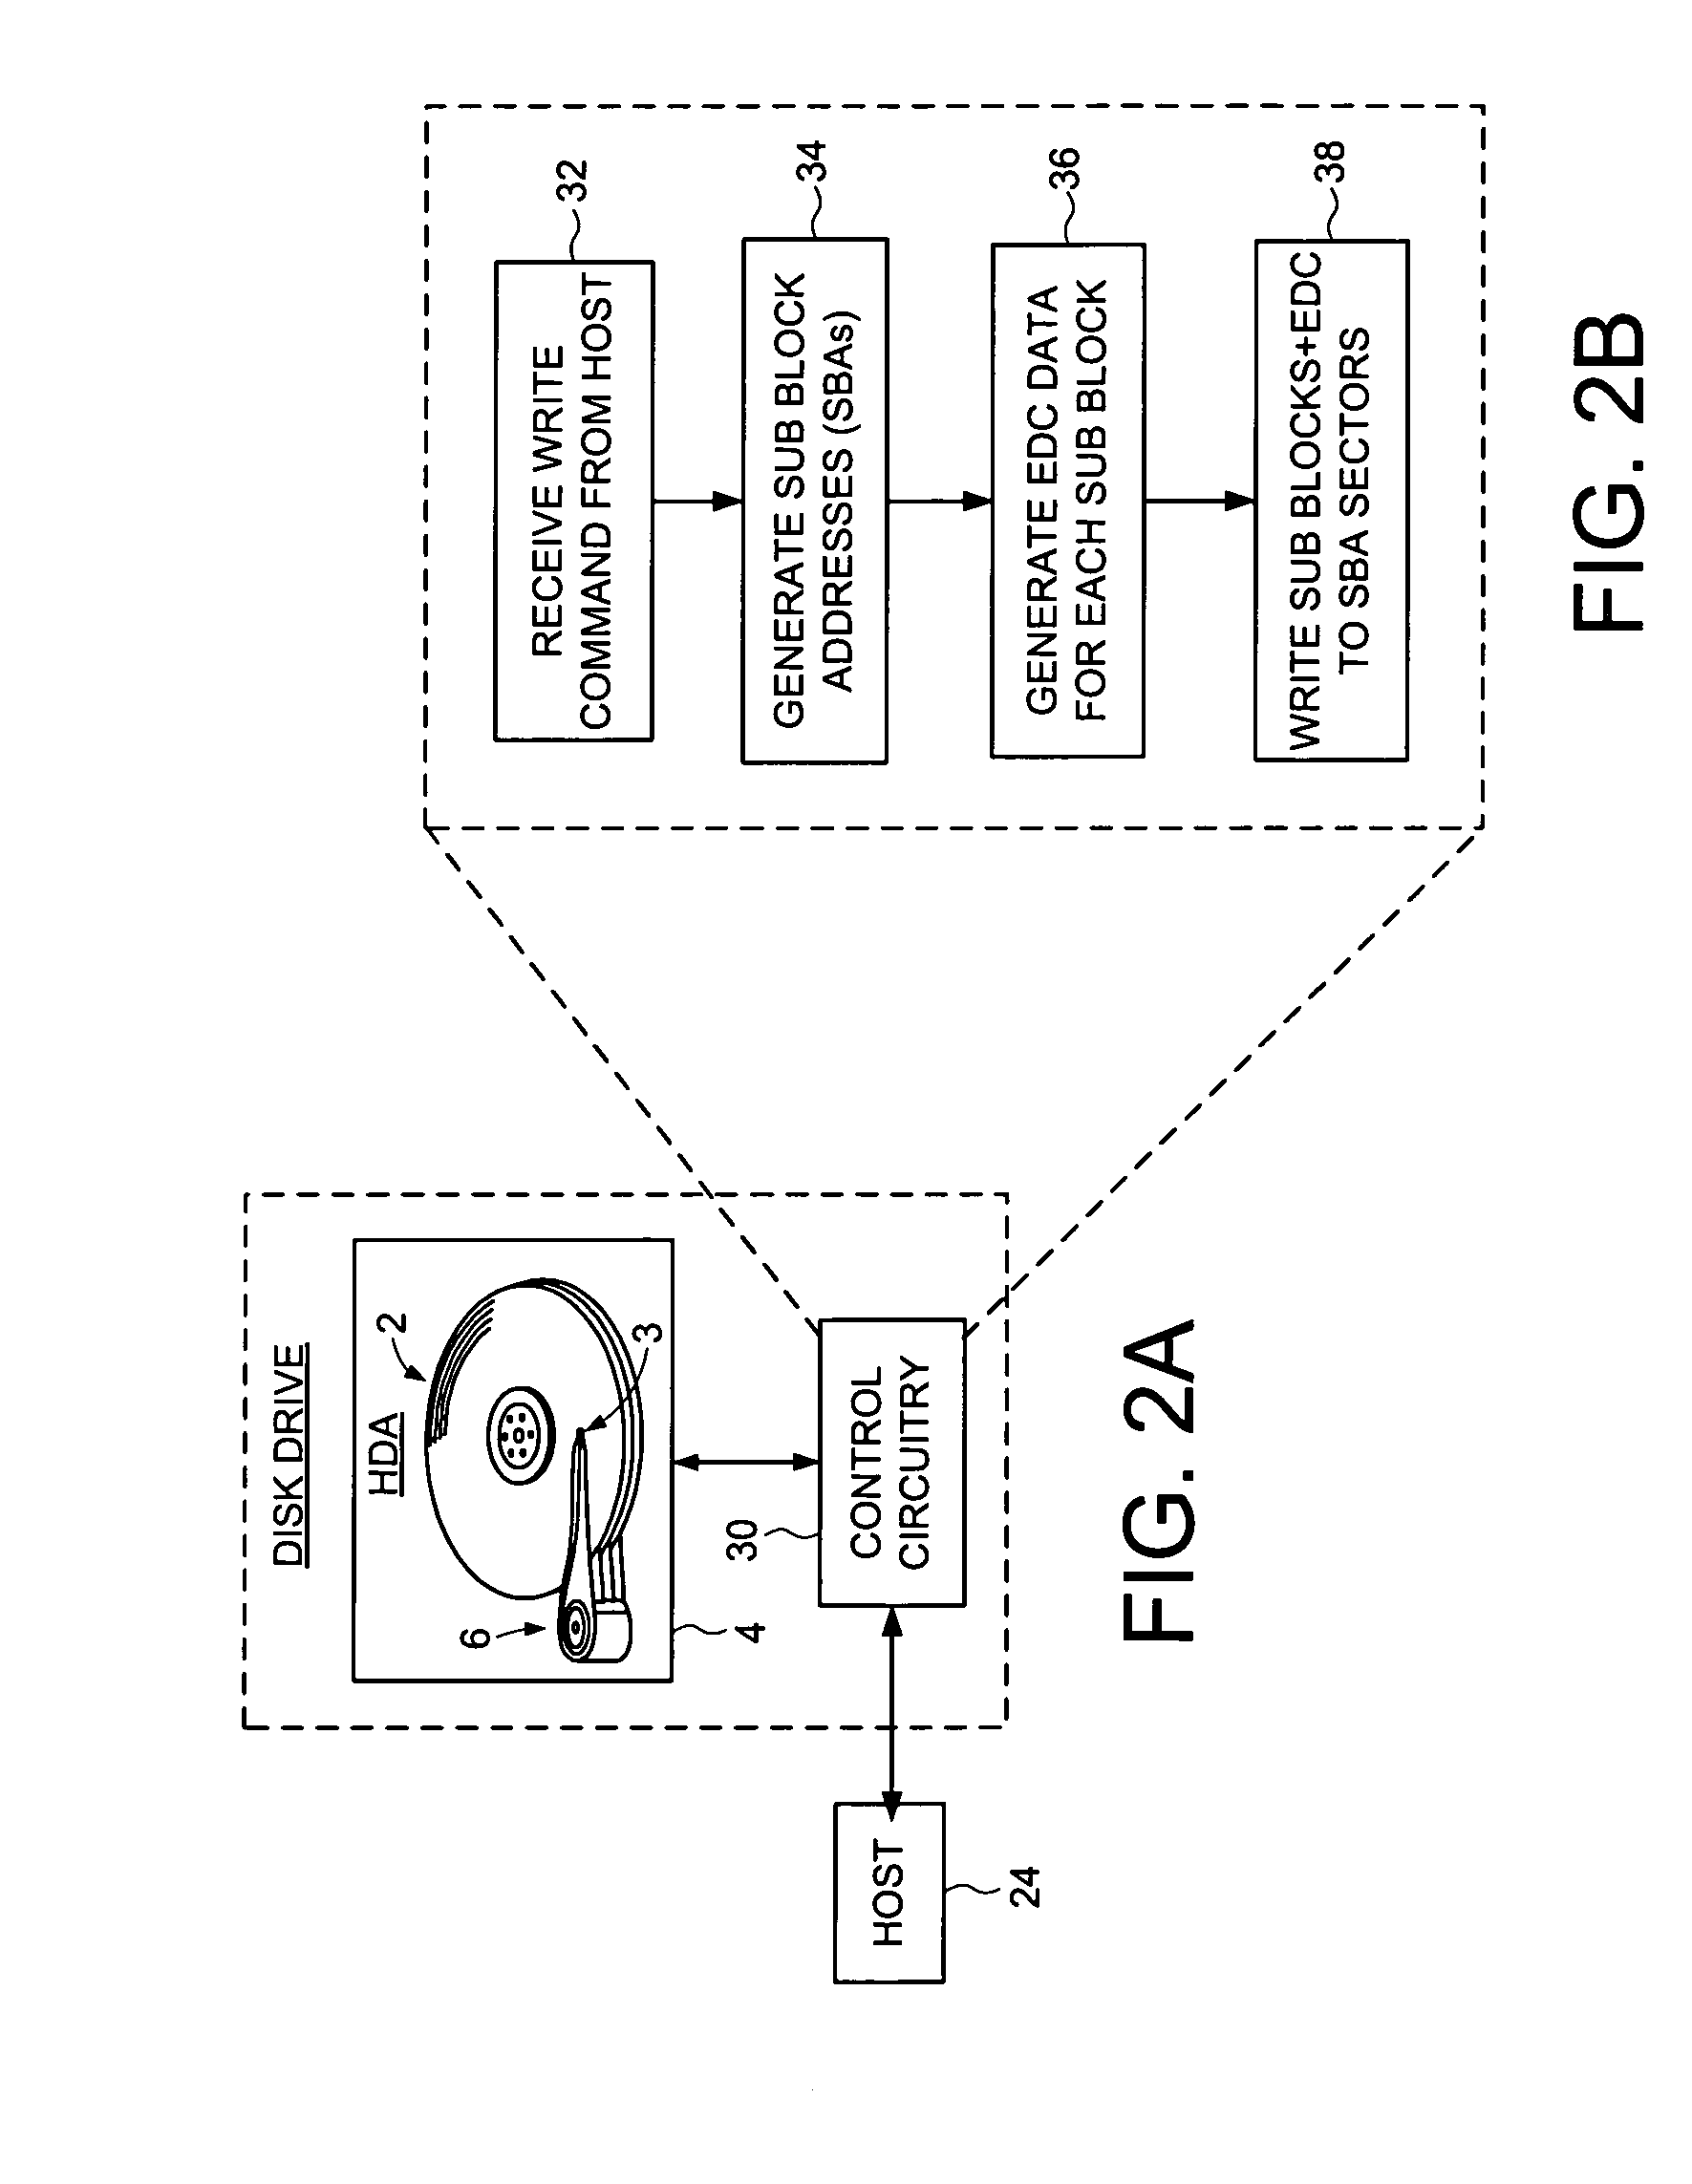 Disk drive implementing data path protection by encoding large host blocks into sub blocks